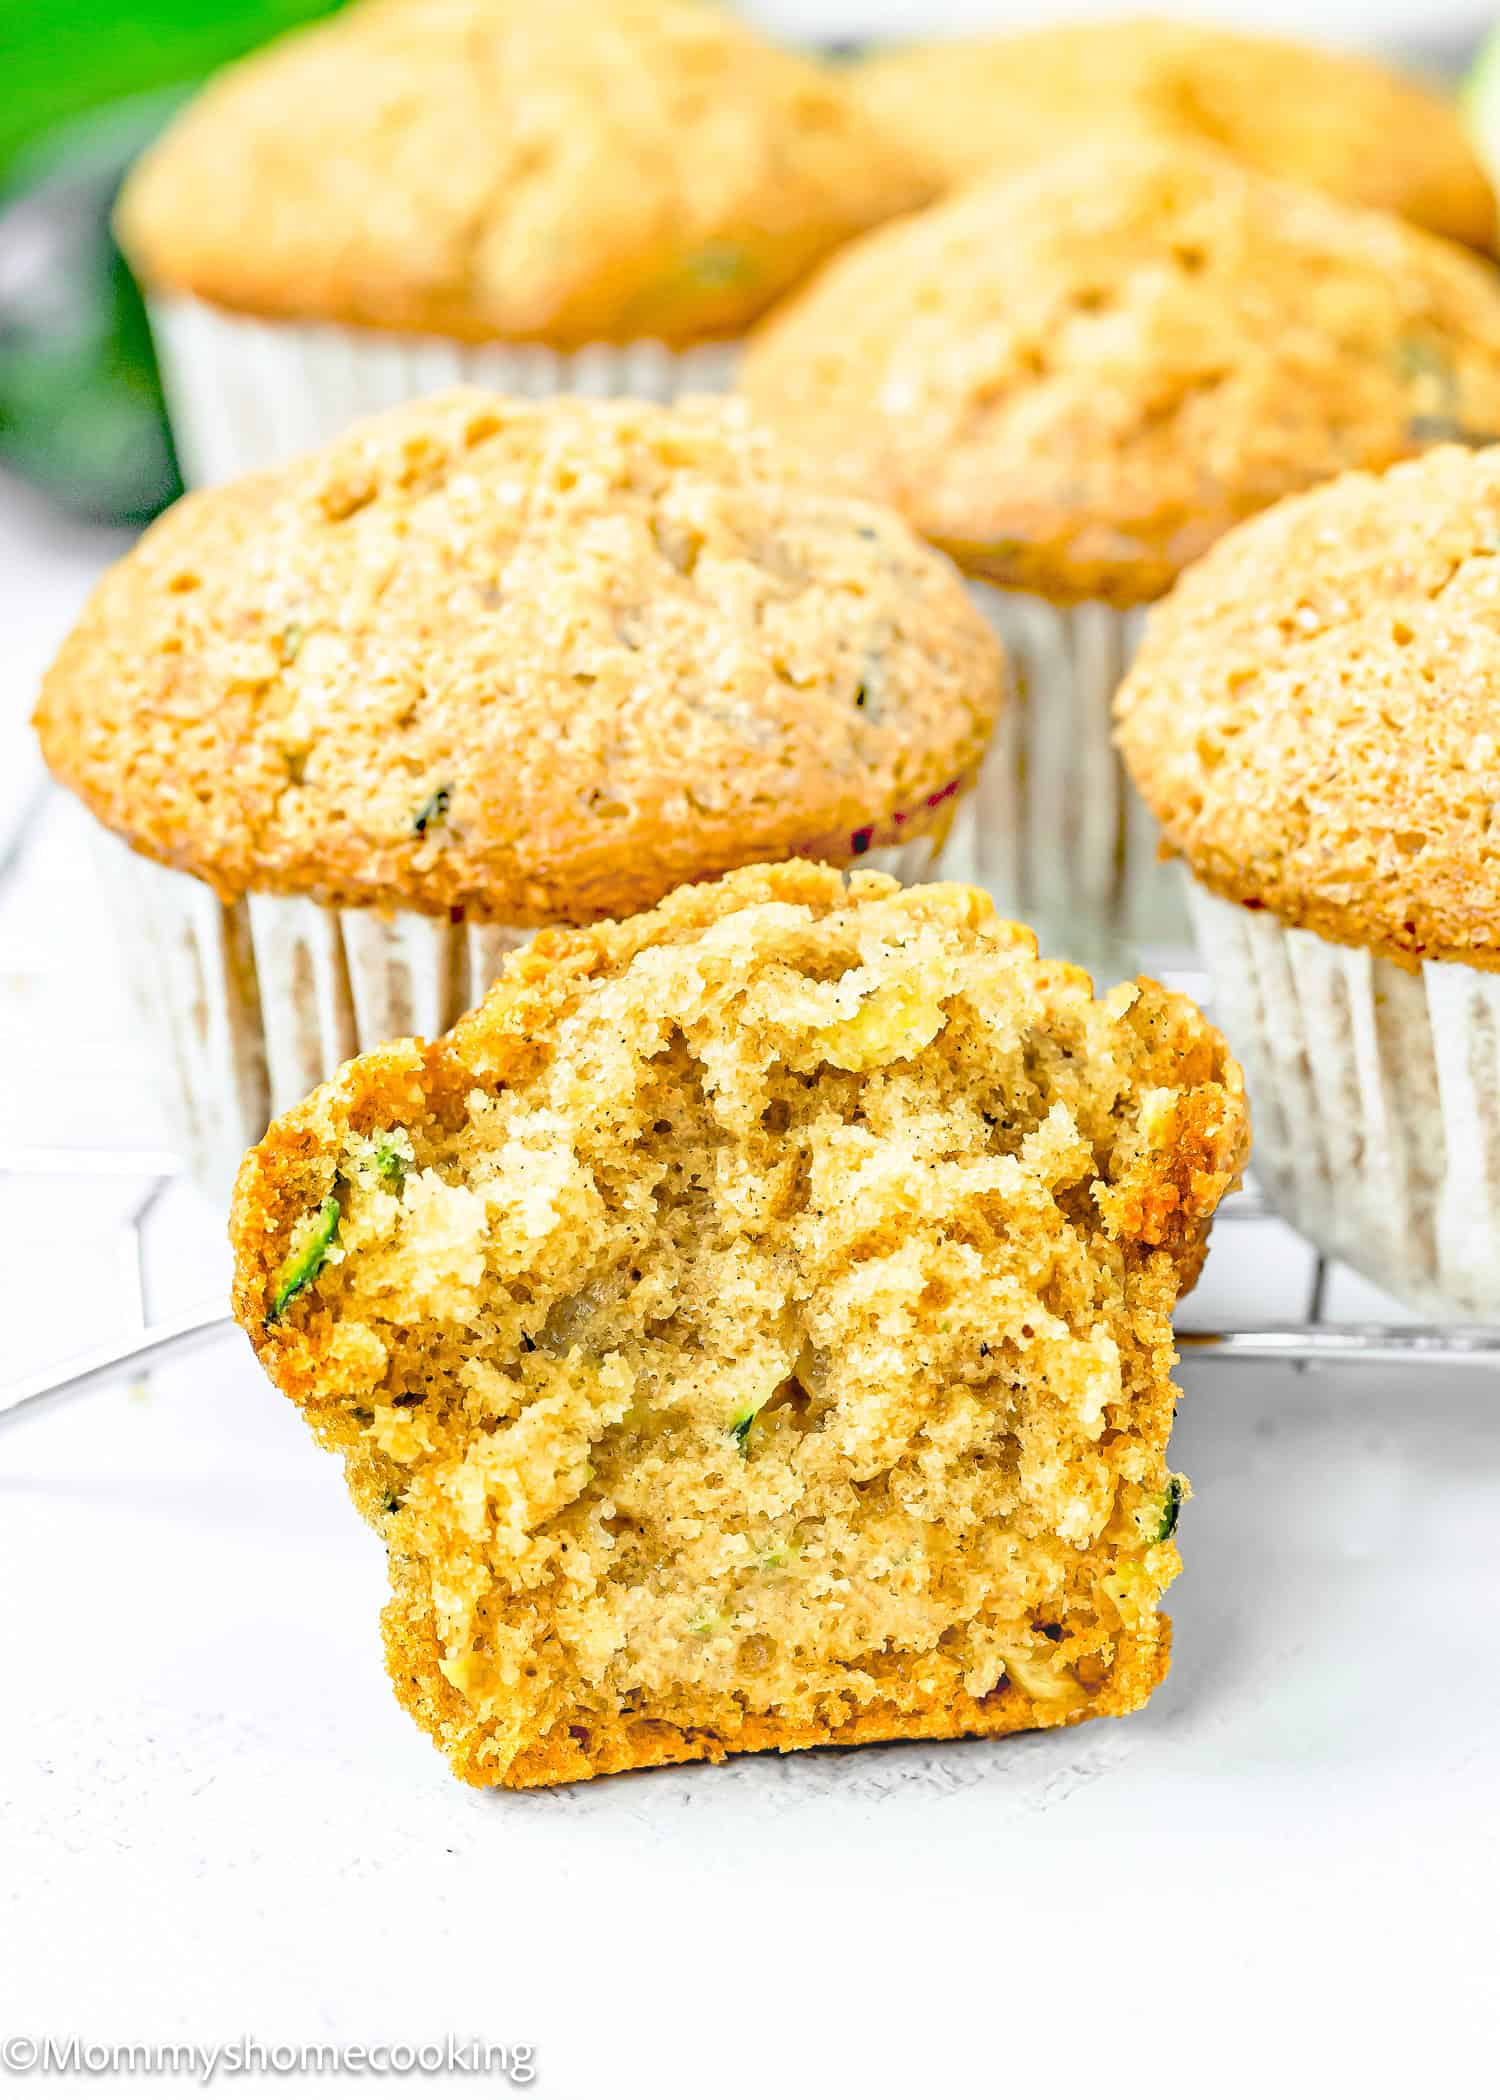 a Simple Vegan Zucchini Muffin cut in half over a white surface with more muffins in the background.